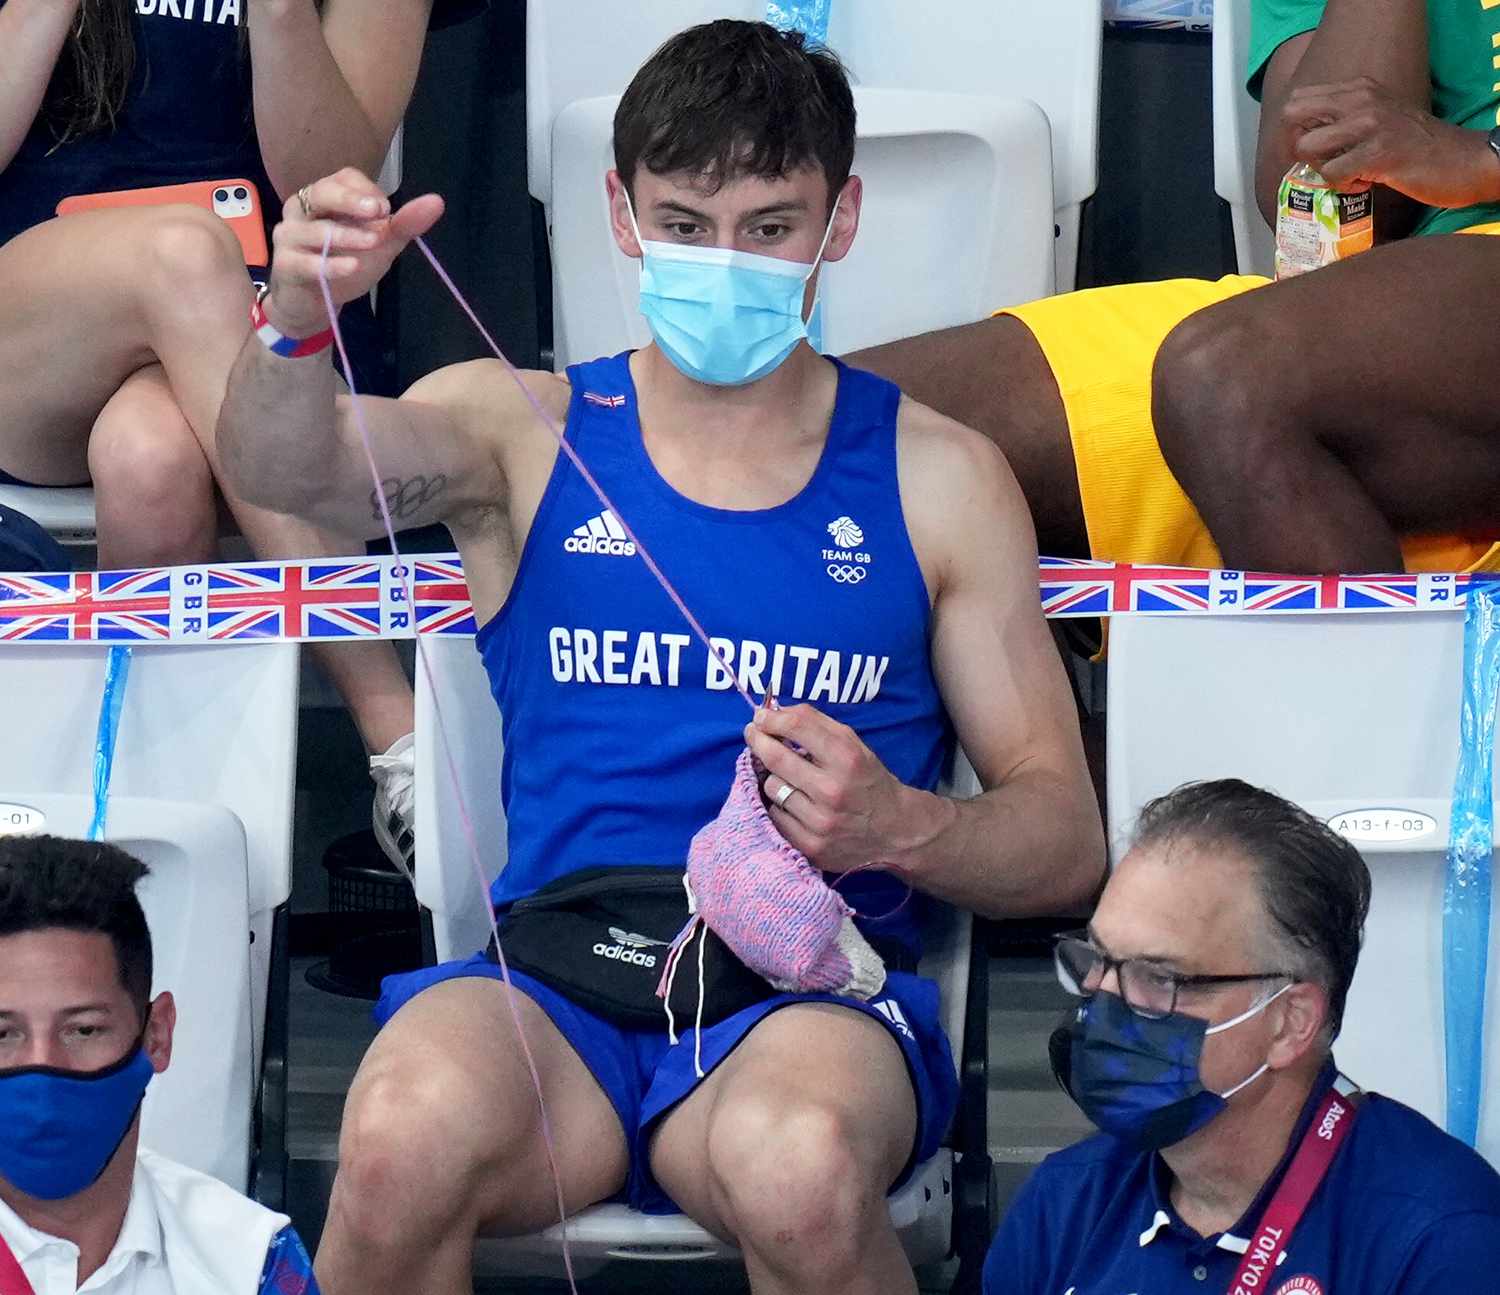 Great Britain's Tom Daley knits in the stands during the Women's 3m Springboard Final at the Tokyo Aquatics Centre on the ninth day of the Tokyo 2020 Olympic Games in Japan. Picture date: Sunday August 1, 2021.